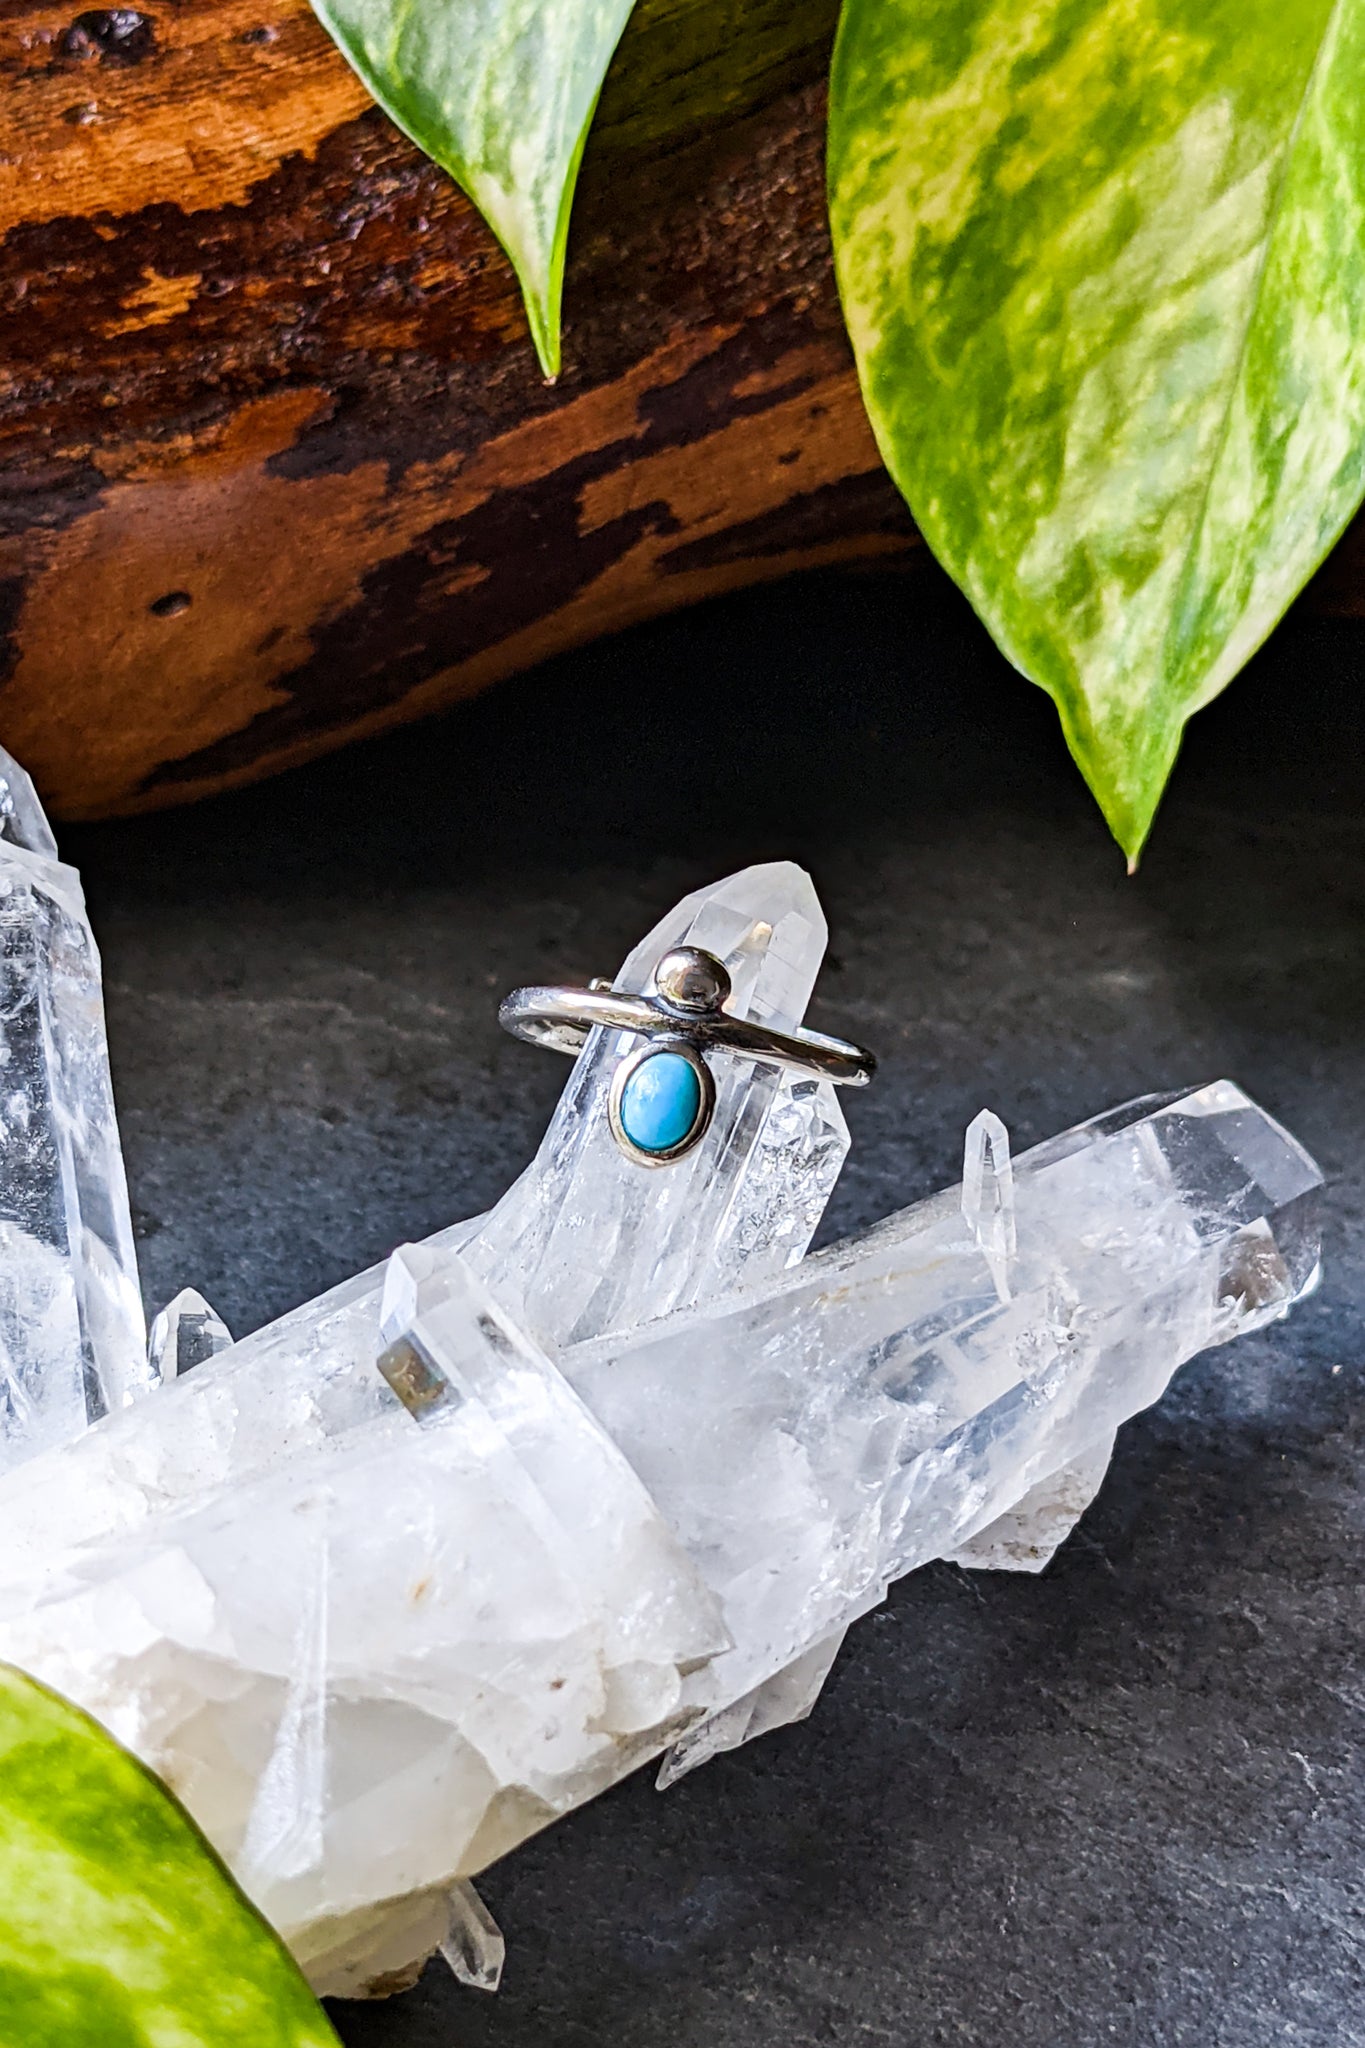 Pana Turquoise Ring - FINAL SALE